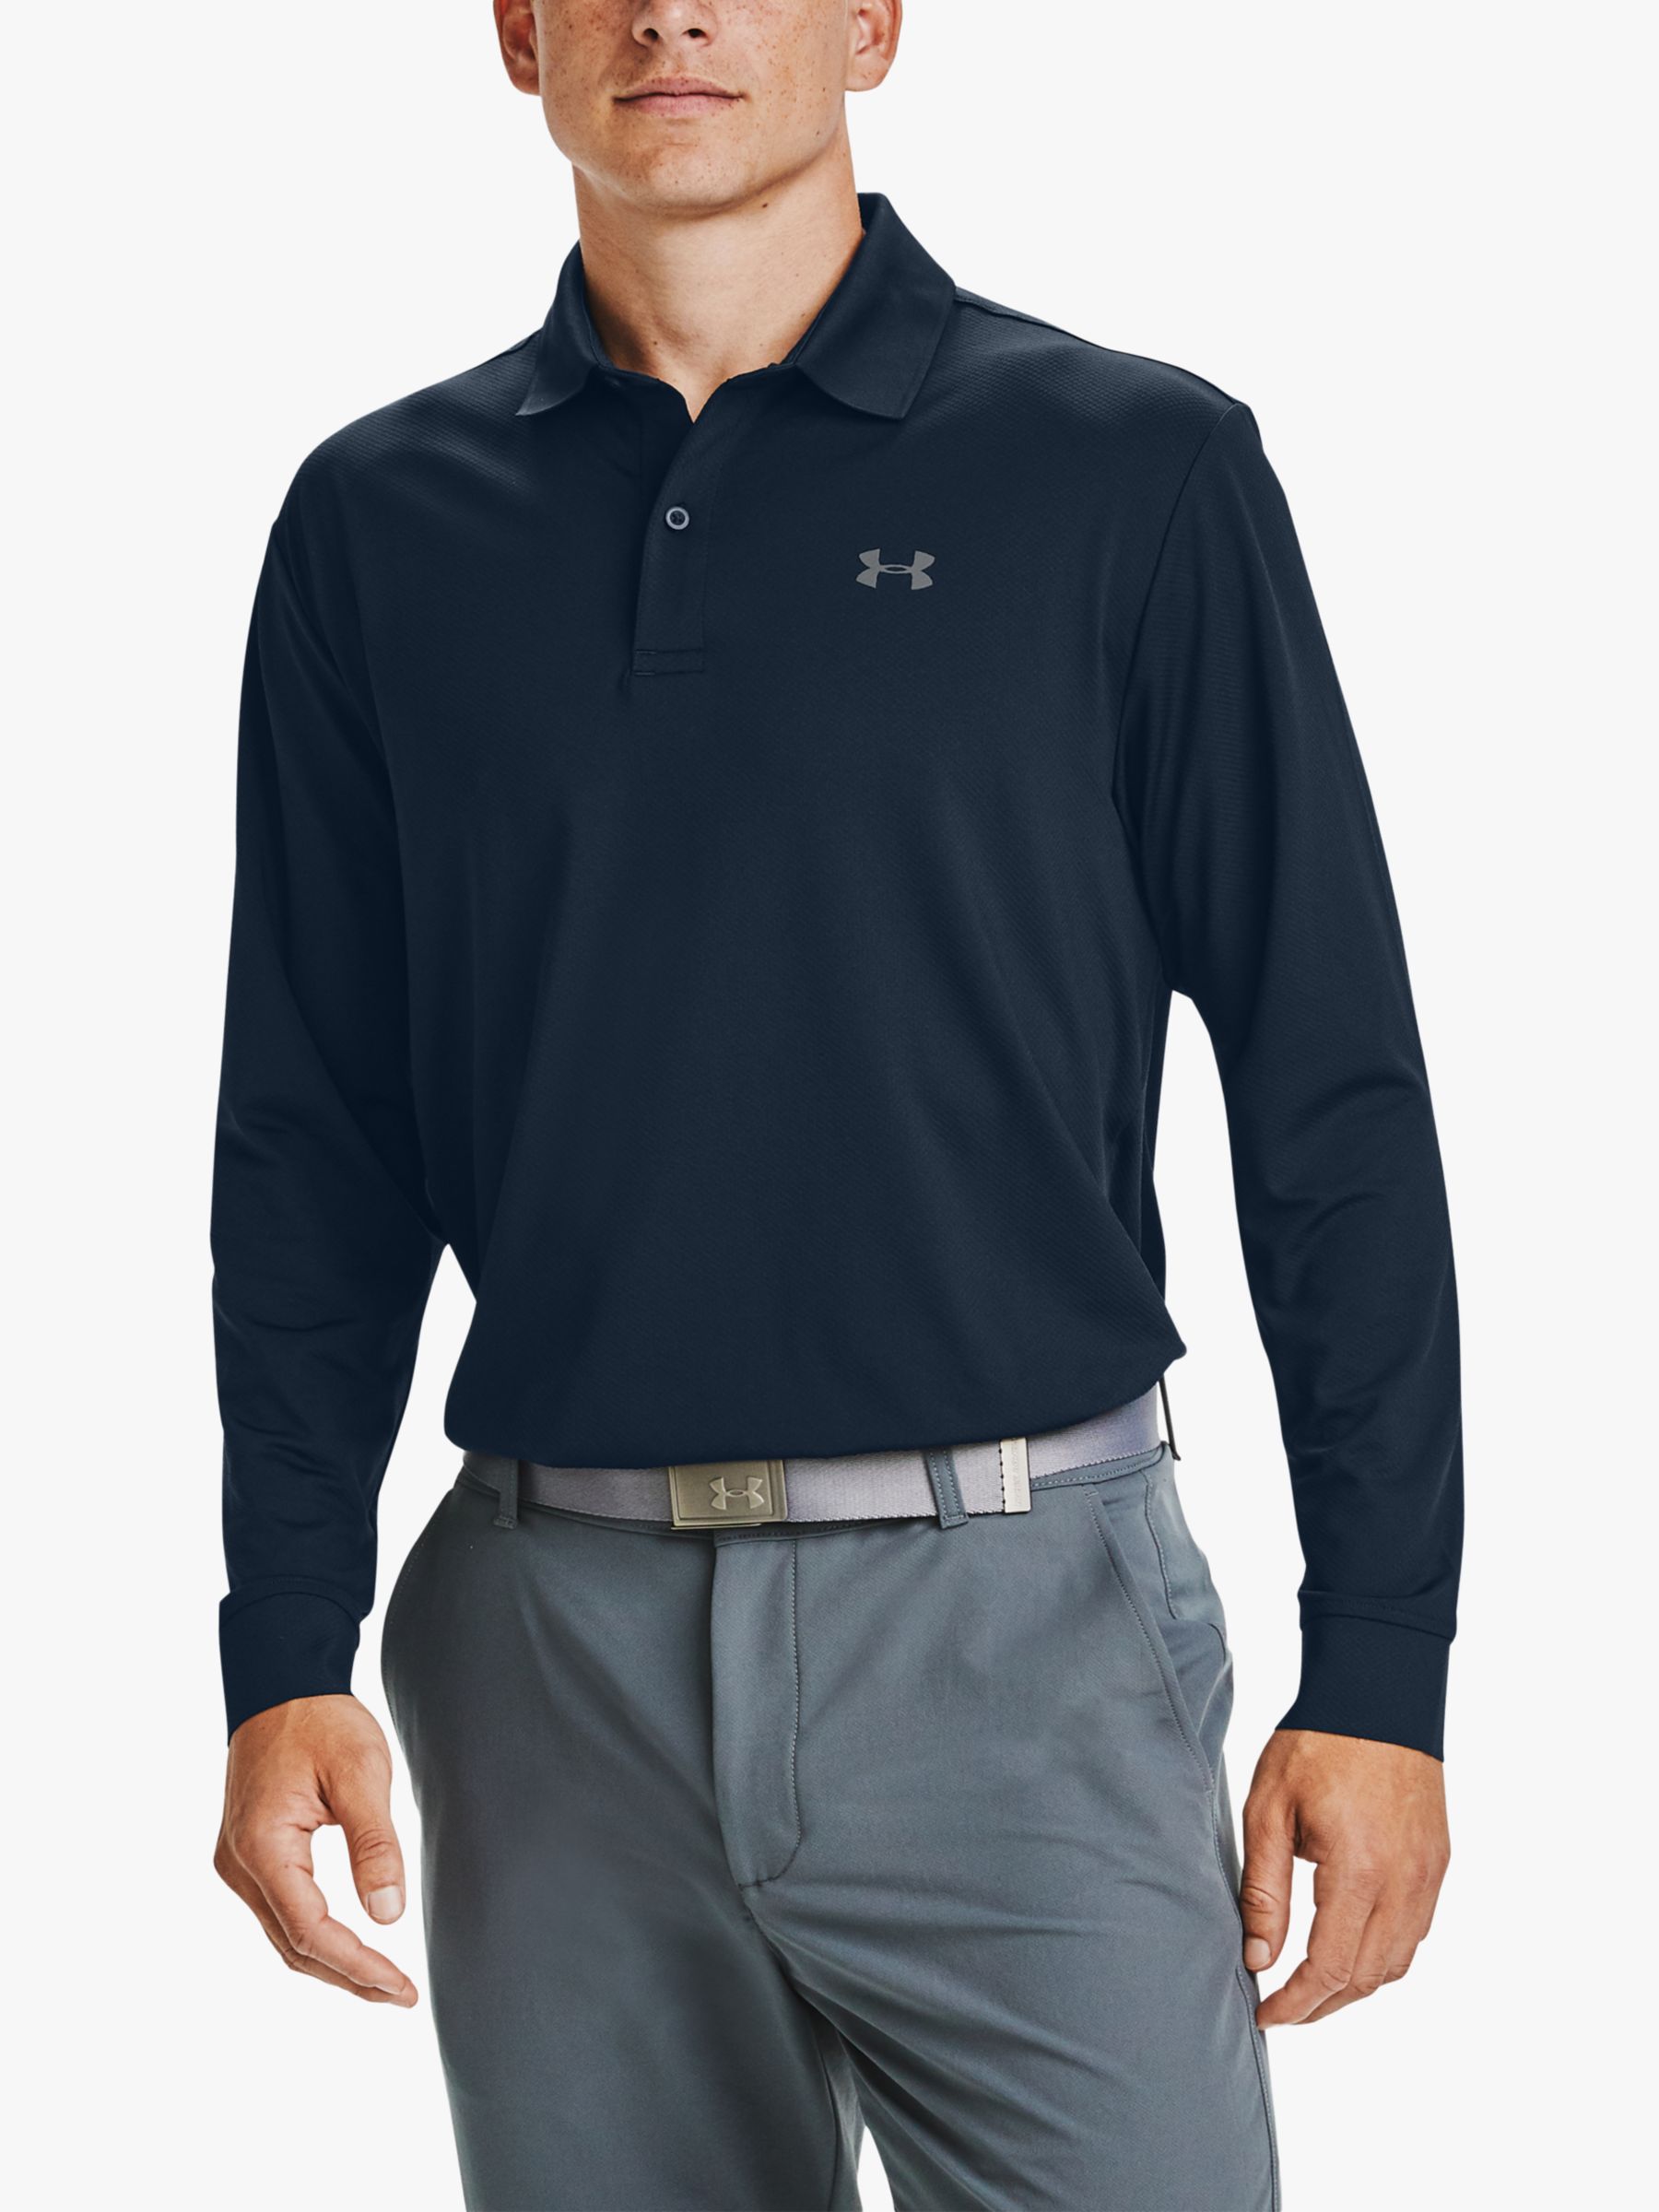 Under Armour Performance Long Sleeve Polo Shirt at John Lewis & Partners